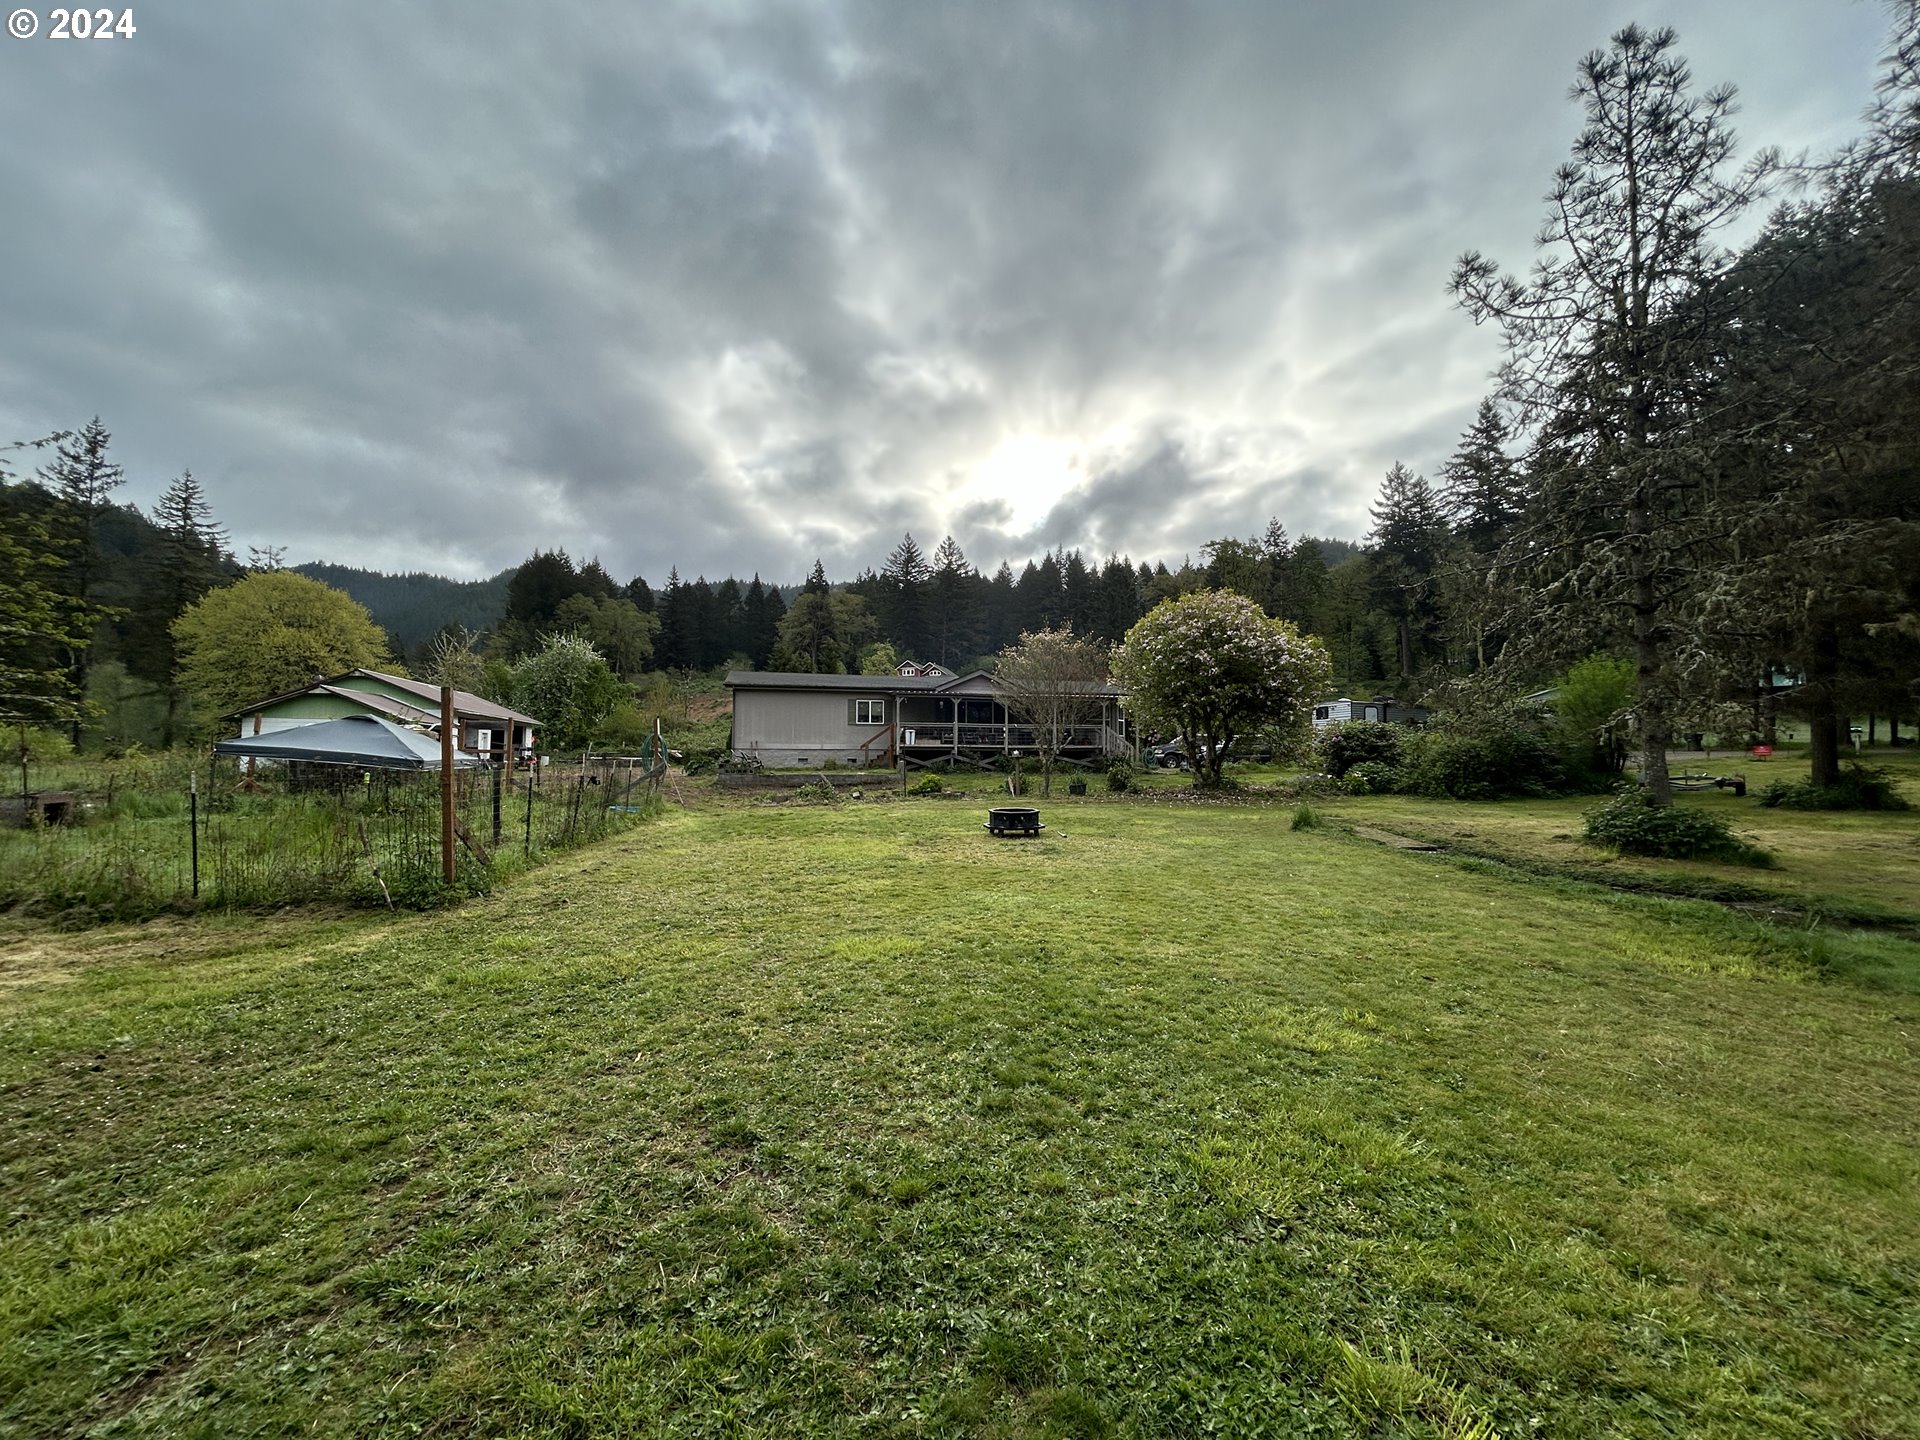 200 SETTLERS CT, Elkton, OR 